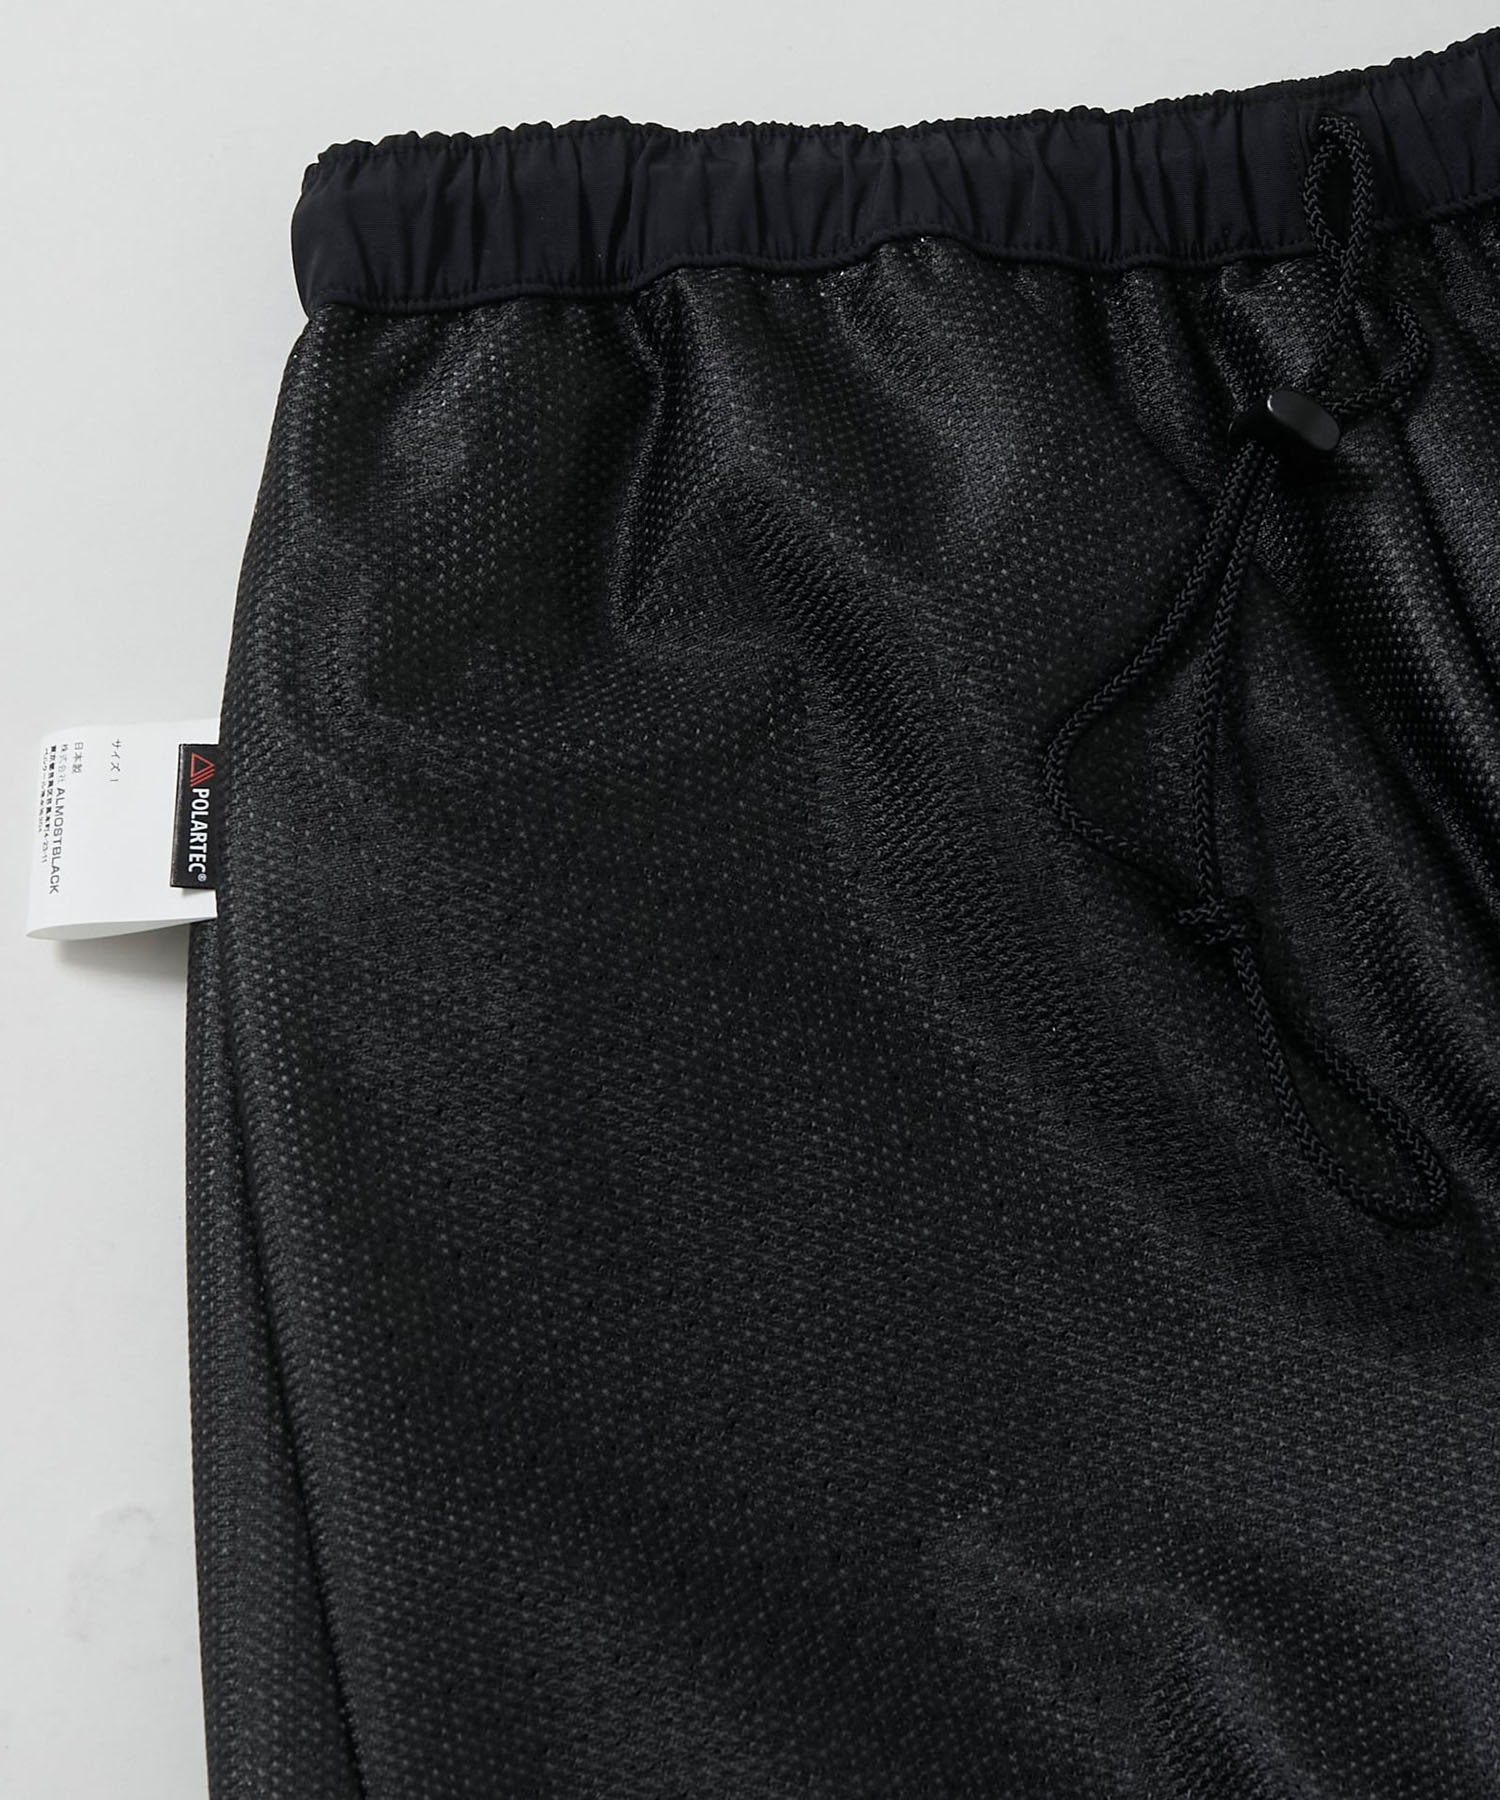 21AW-PPT06 Pants Product Twelve